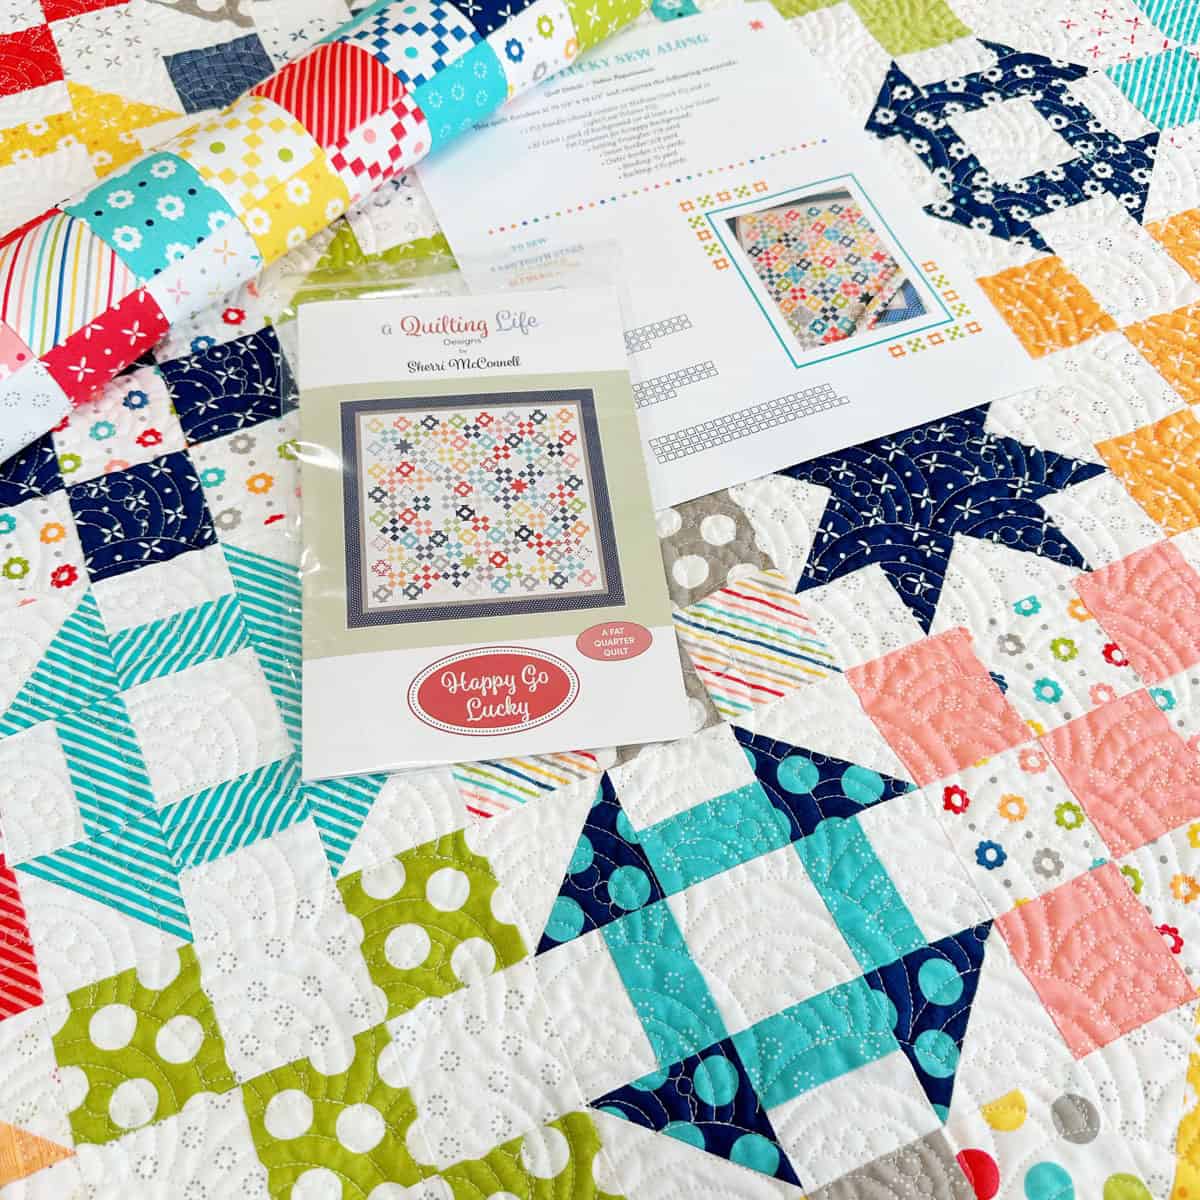 Scrappy Patchwork Happy Go Lucky Quilt from Sherri at A Quilting Life